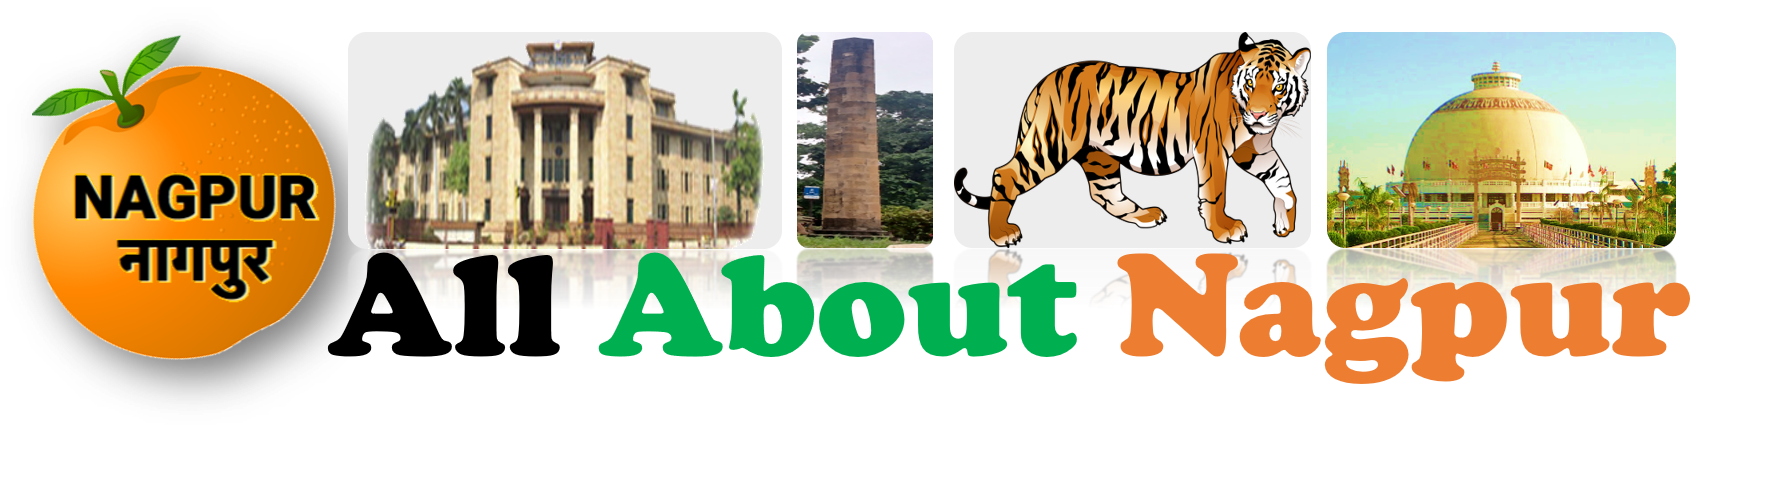 all-about-nagpur